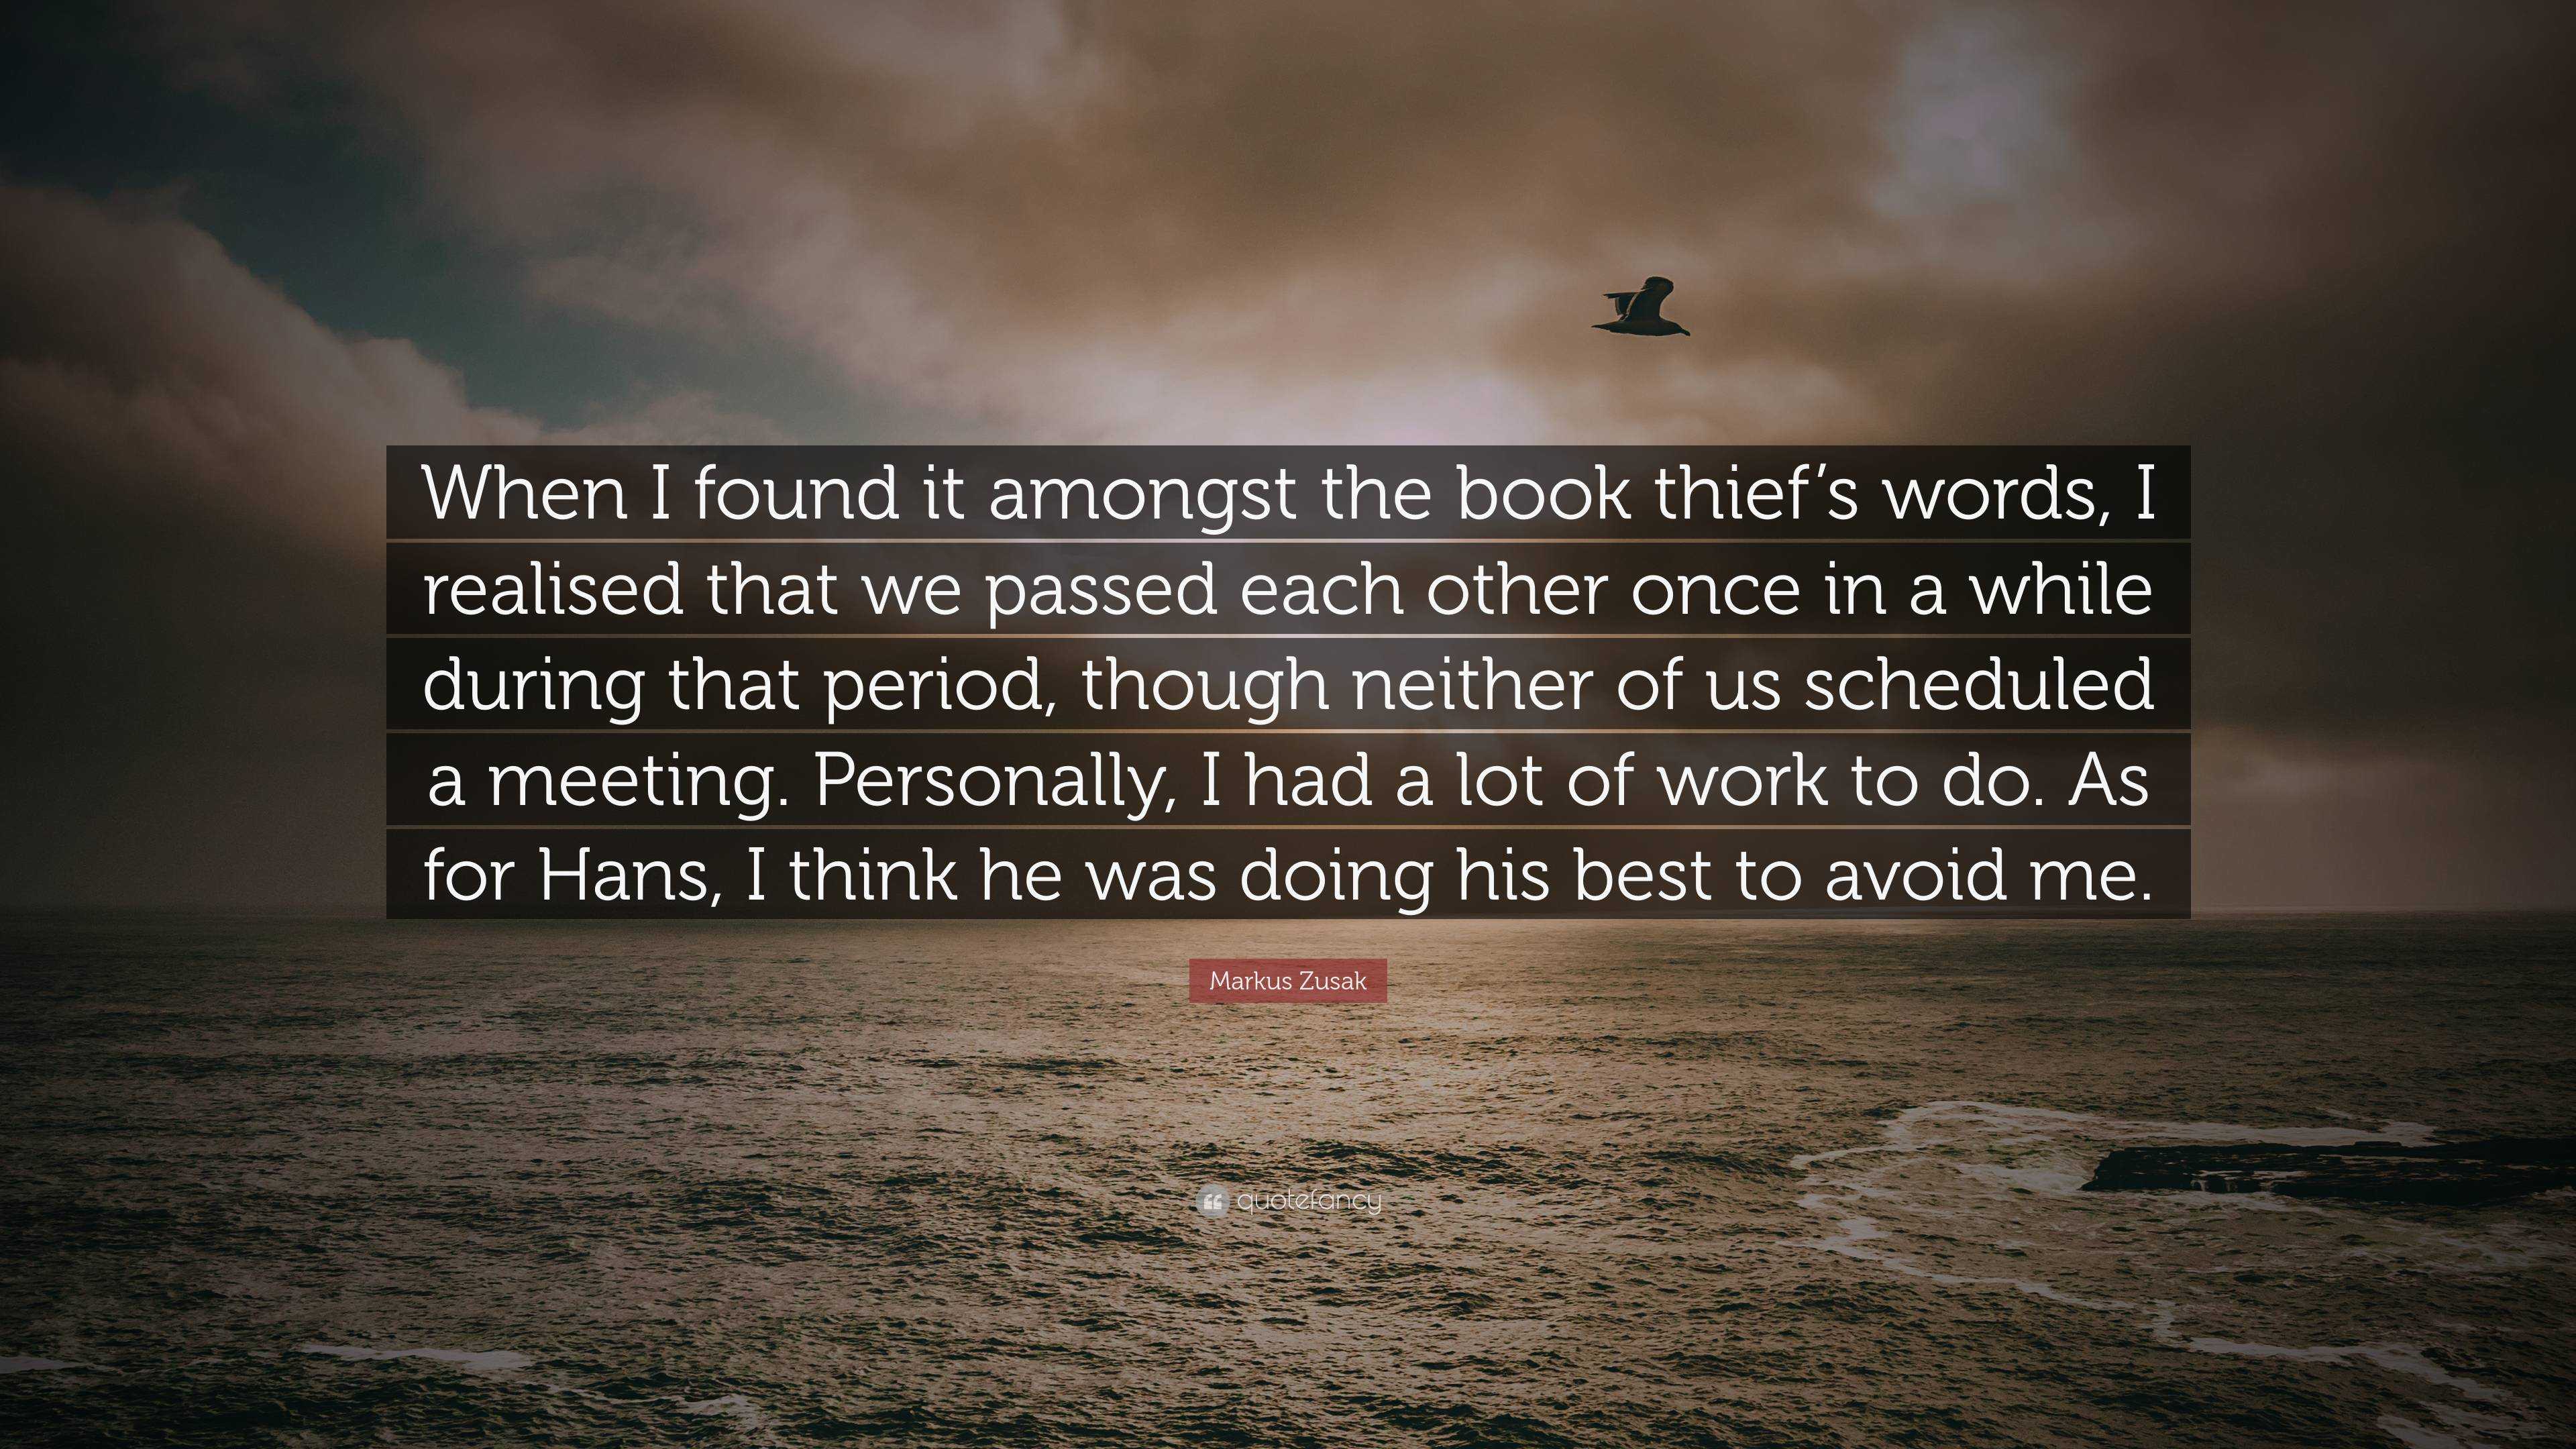 Markus Zusak Quote: “When I found it amongst the book thief's words, I  realised that we passed each other once in a while during that period,...”